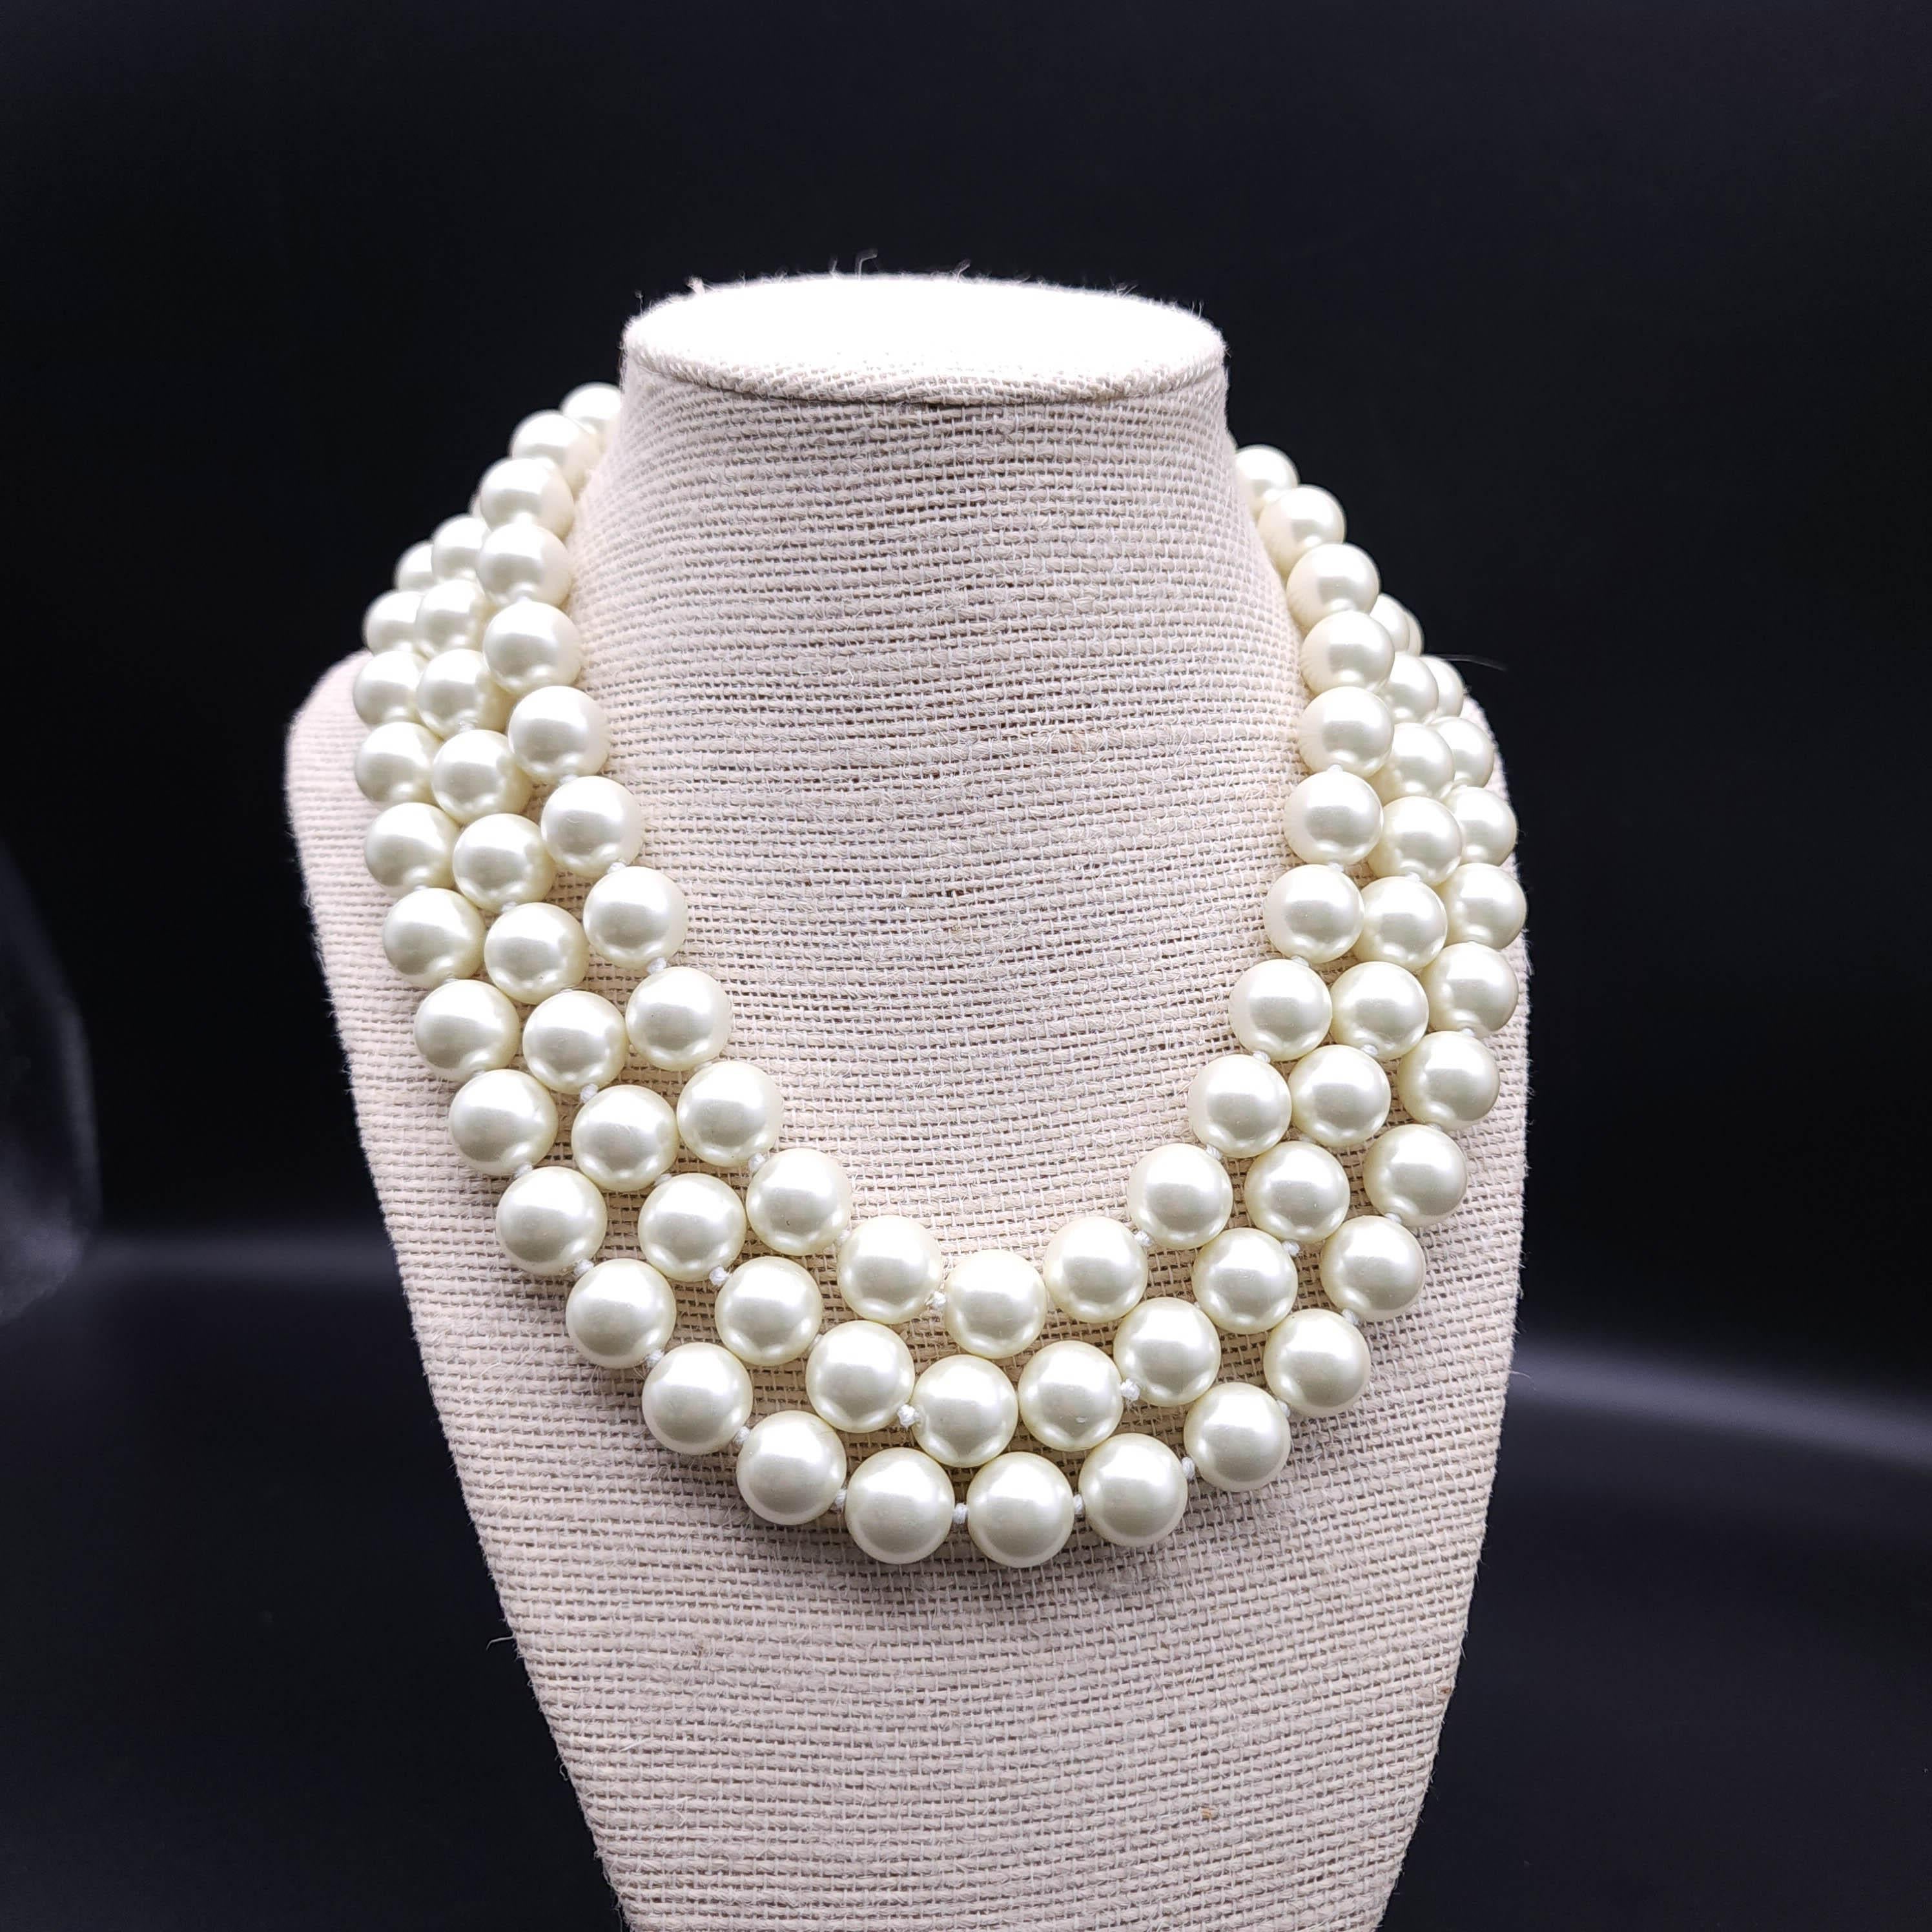 Add a touch of timeless elegance to your jewelry collection with the Kenneth Jay Lane multi-strand faux pearl necklace. Crafted with meticulous attention to detail, this exquisite necklace features:

Three Strands of Lustrous Faux Pearls: The